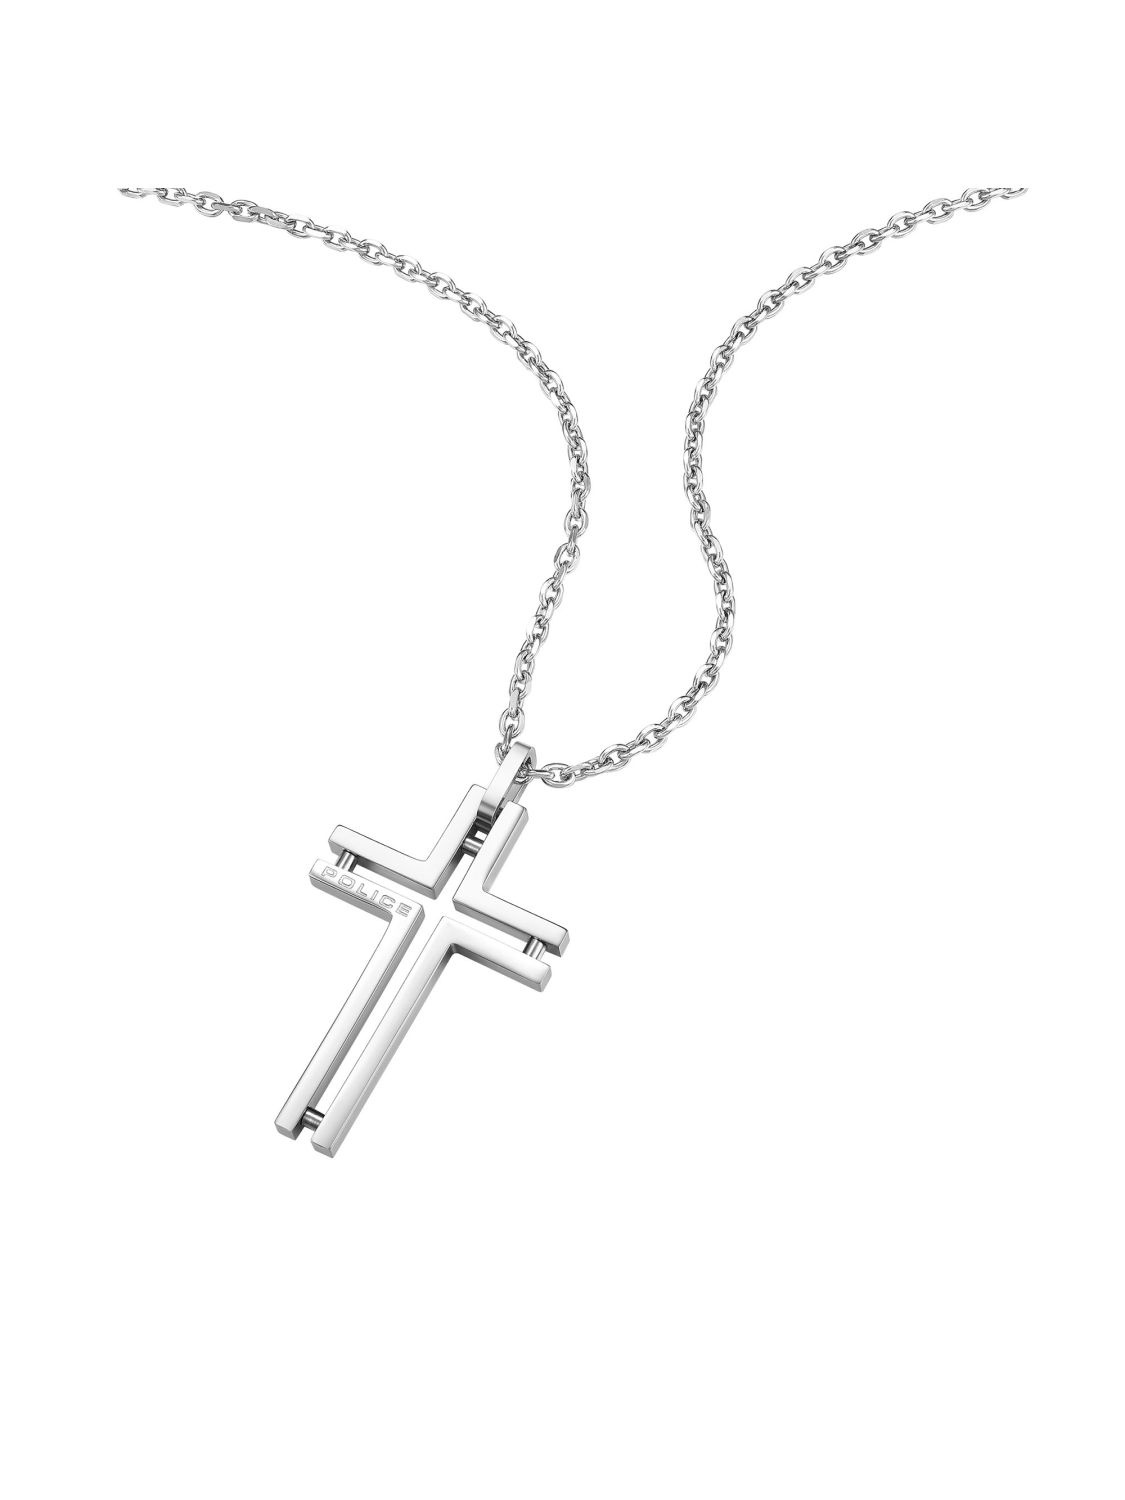 uhrcenter Police Framed Men\'s Necklace with Steel • Stainless PEAGN0005305 Cross